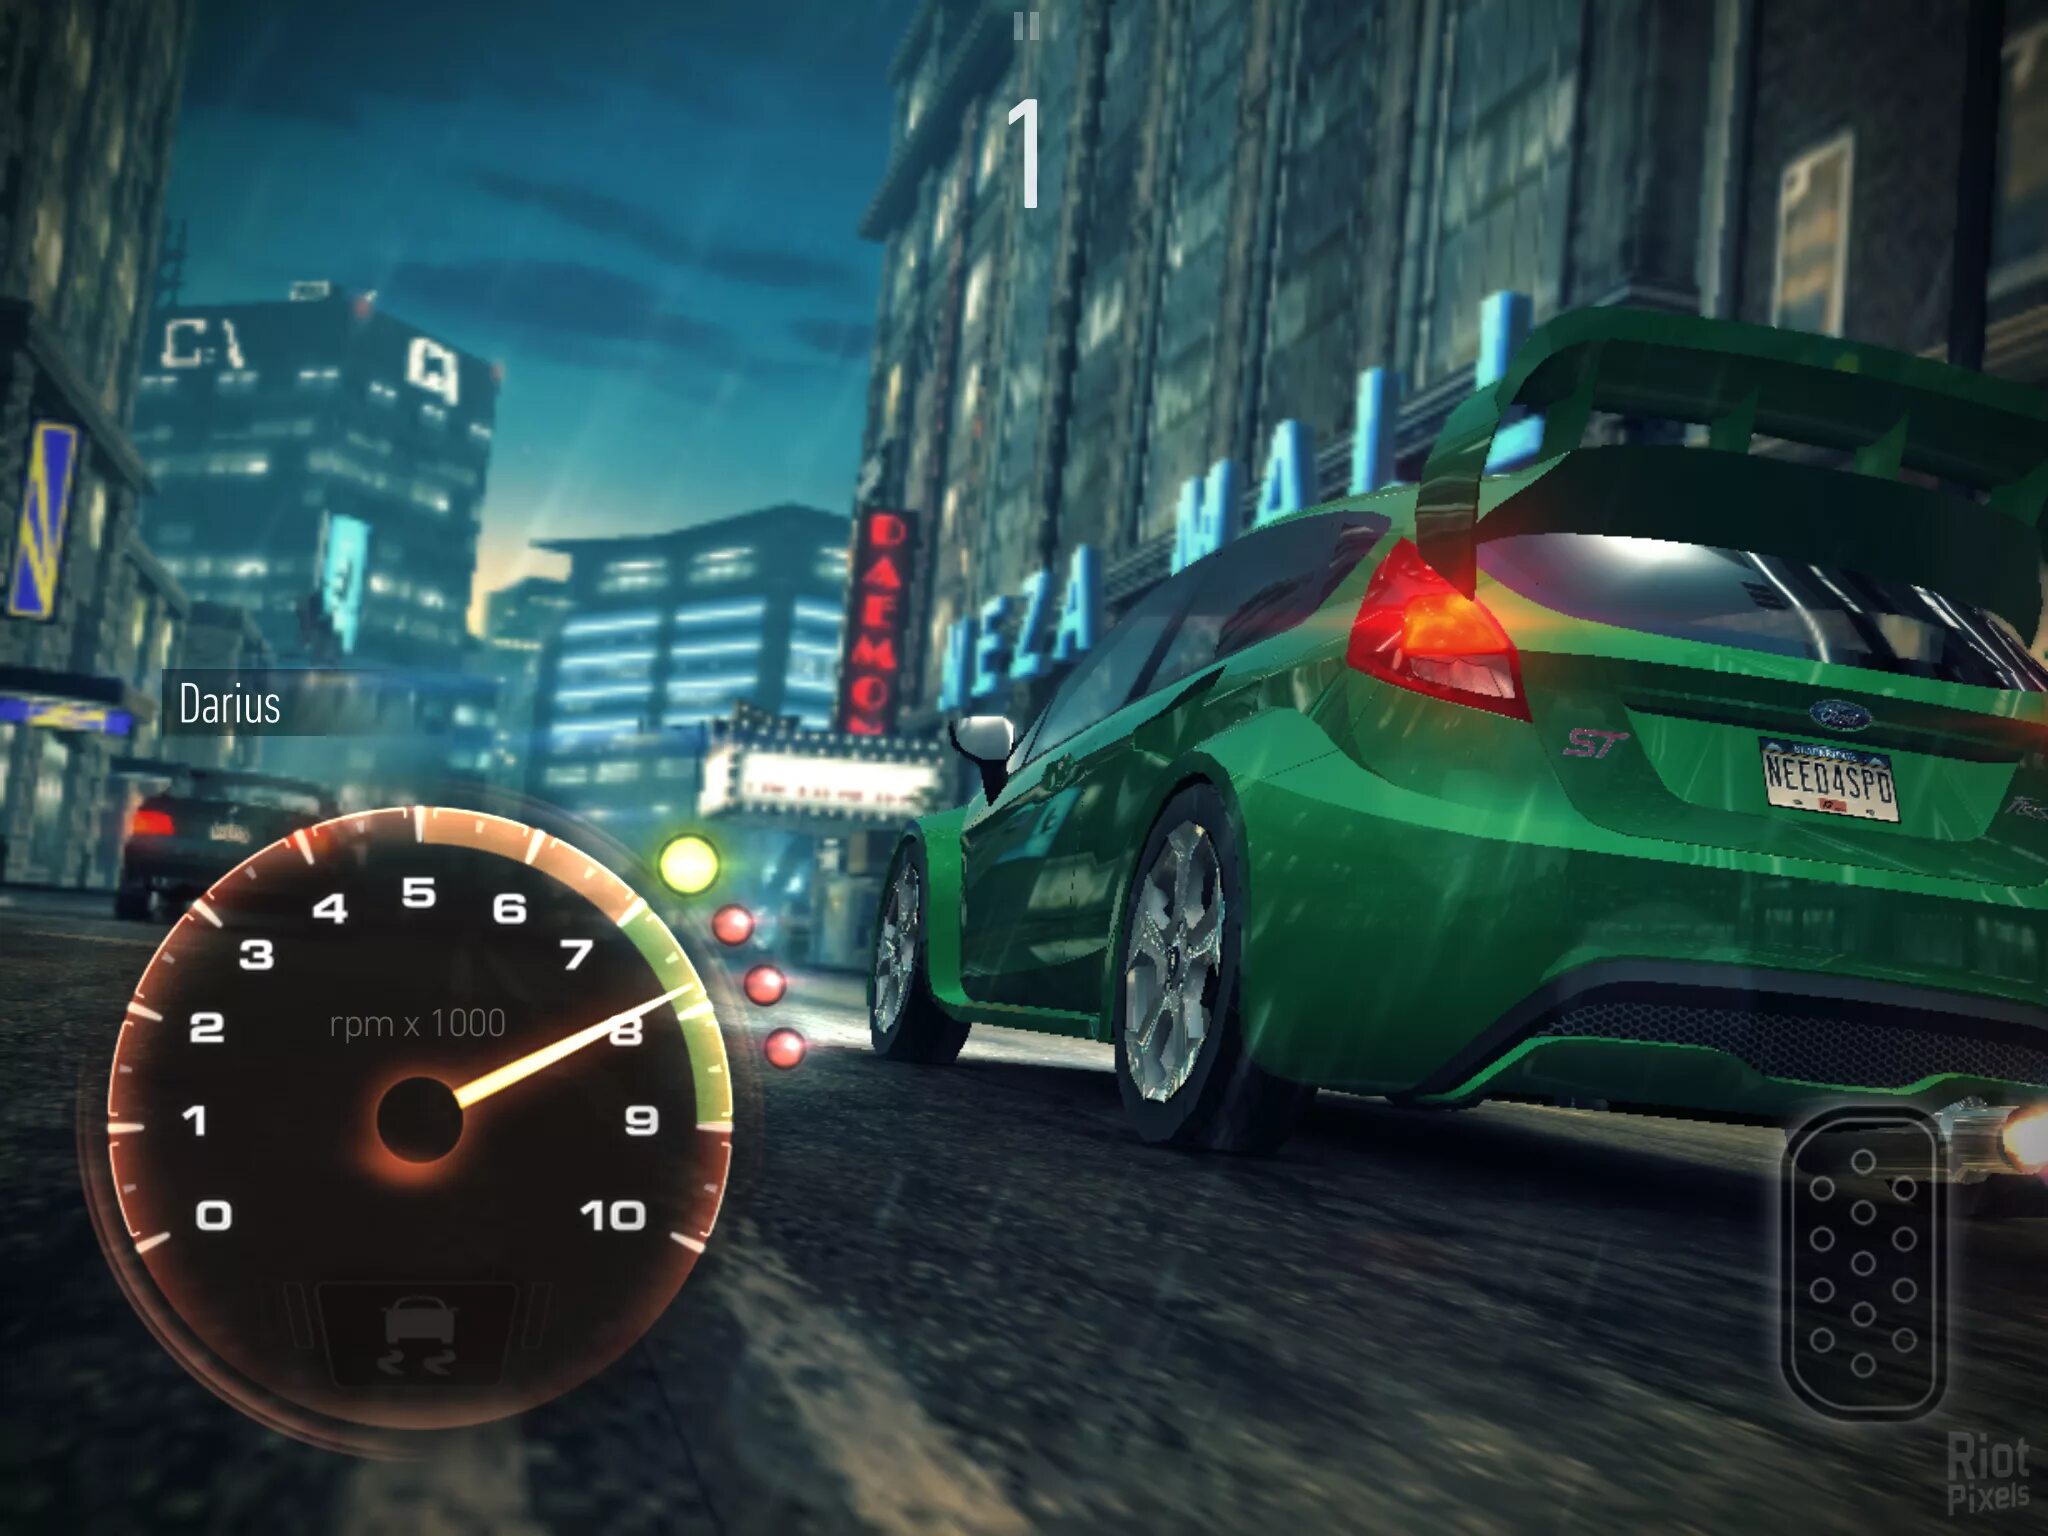 No limits на пк. Need for Speed no limits. Игра NFS no limits. Нфс no limits. Need for Speed nl гонки.